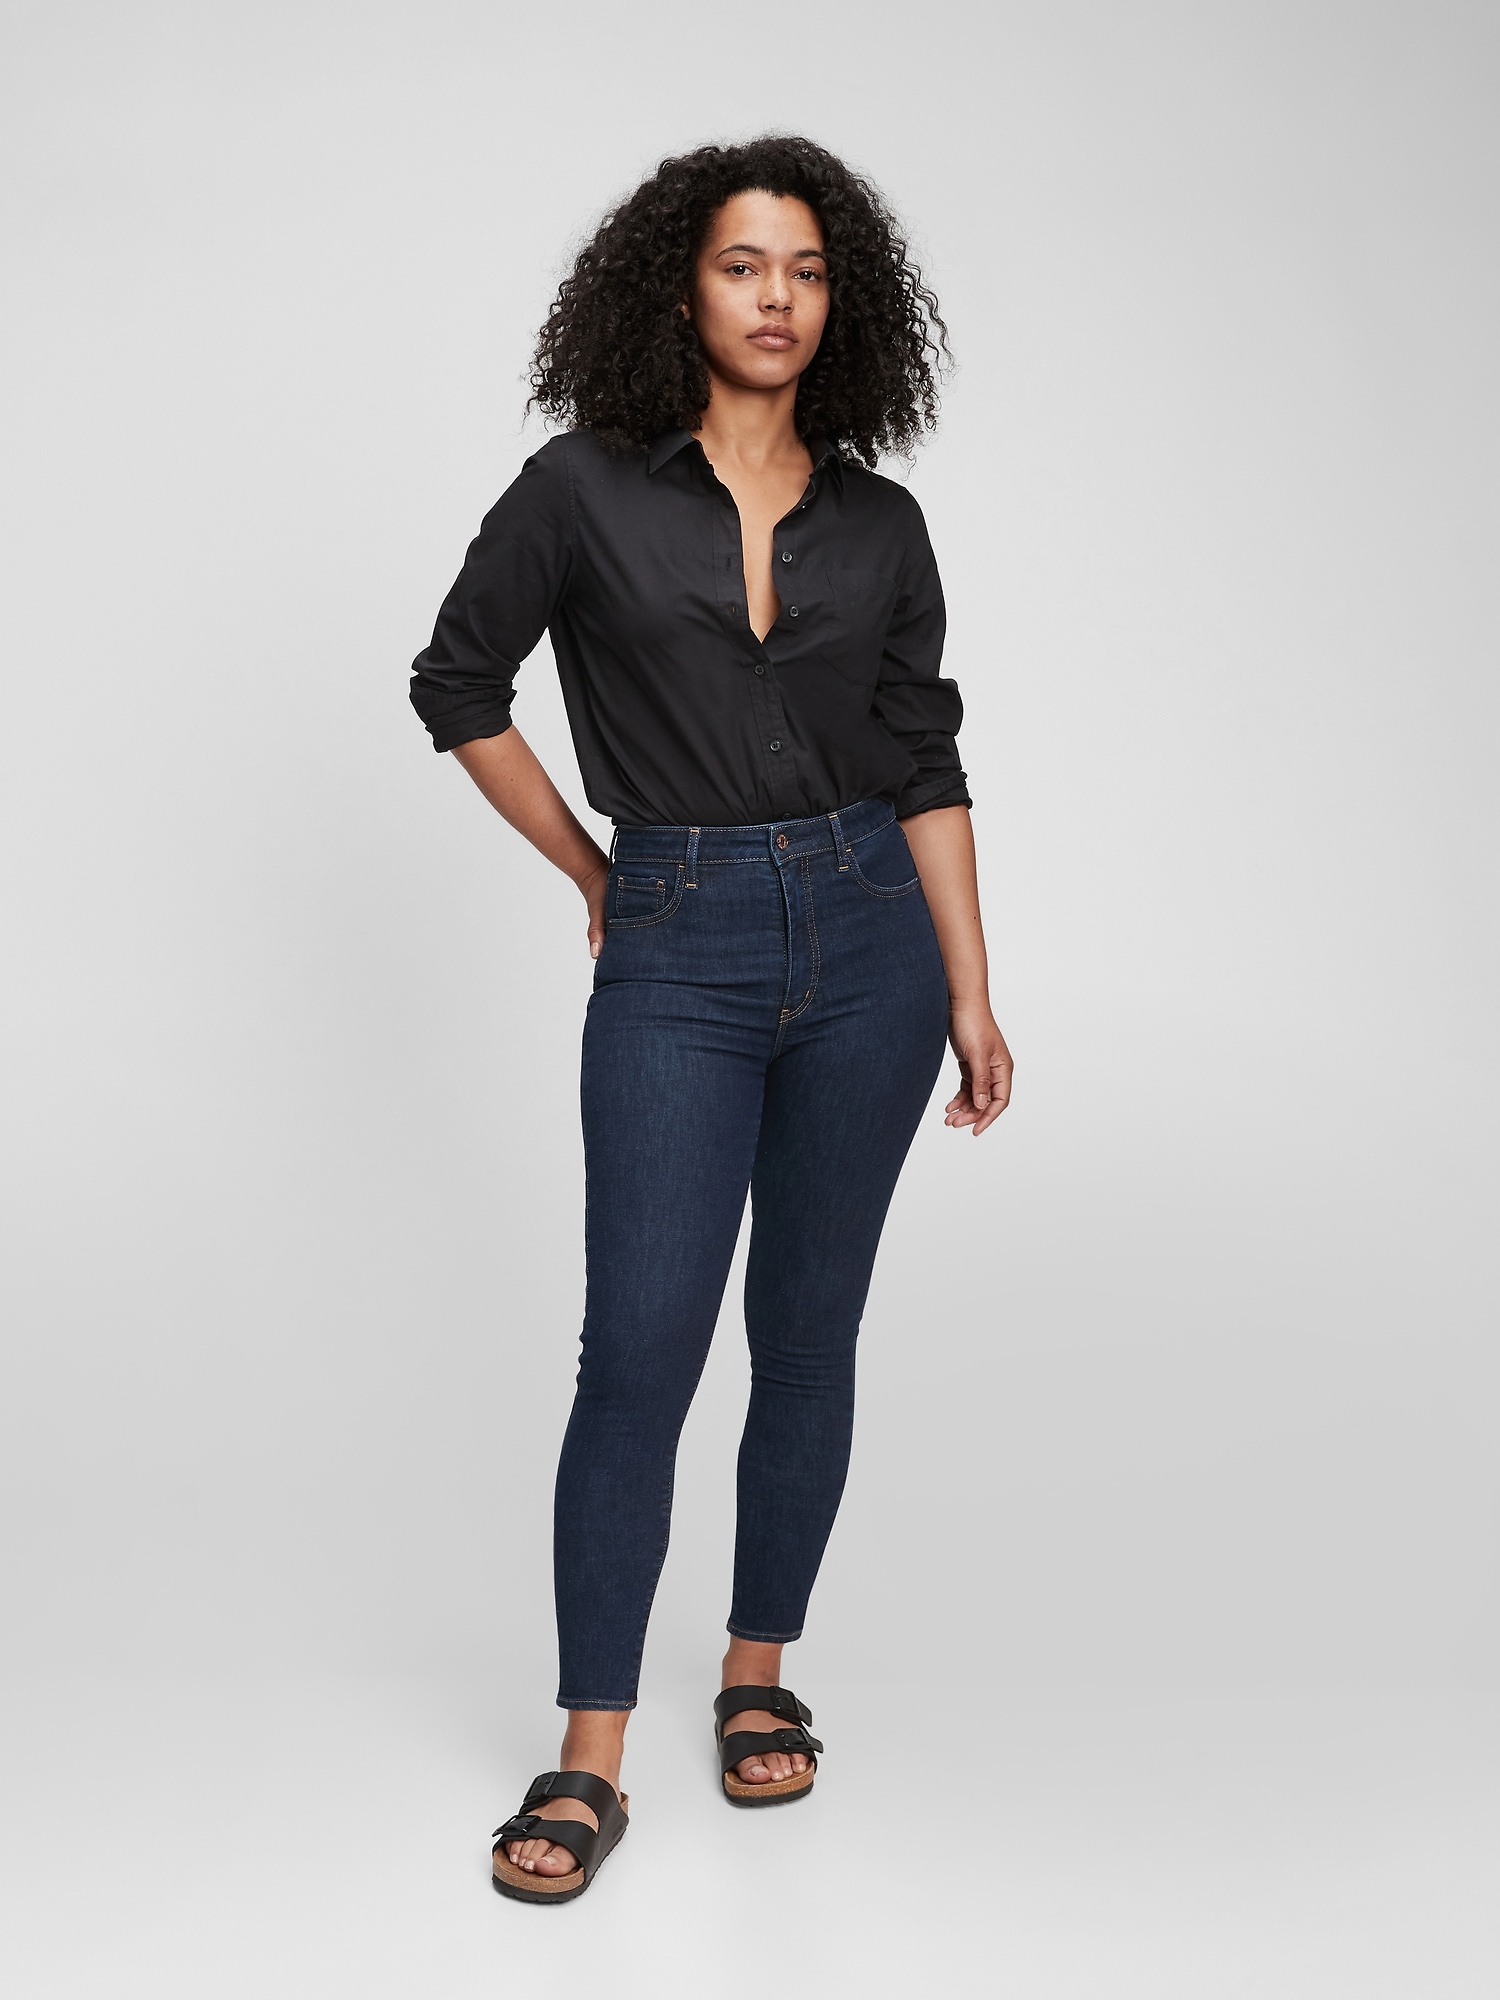 Buy Gap High Waisted Washwell Jeggings from the Gap online shop